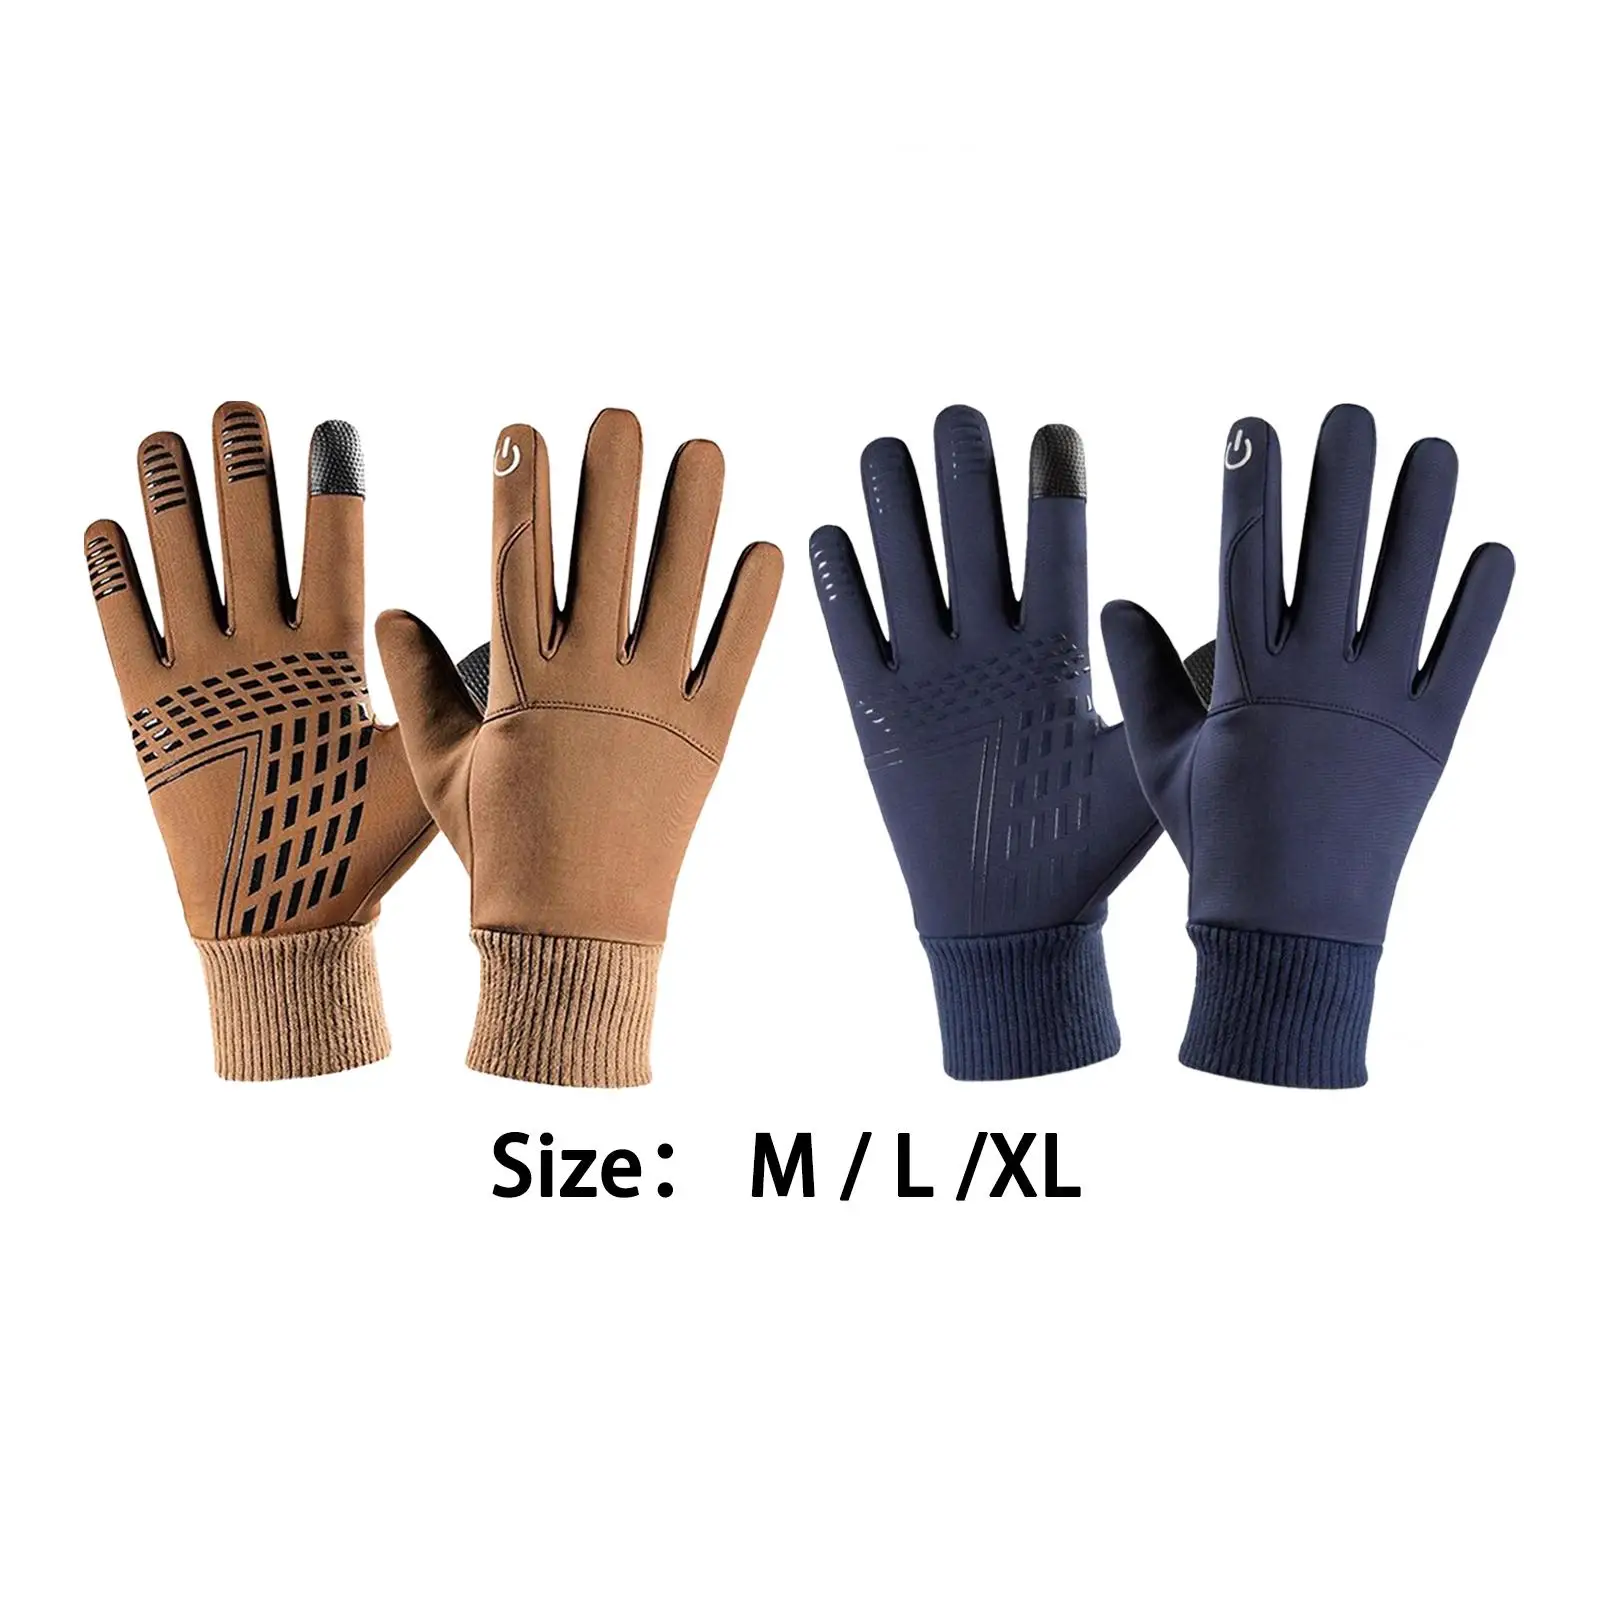 Winter Ski Gloves Cold Weather Waterproof Comfortable Windproof Touchscreen Skiing Glove for Running Biking Snow Skating Outdoor